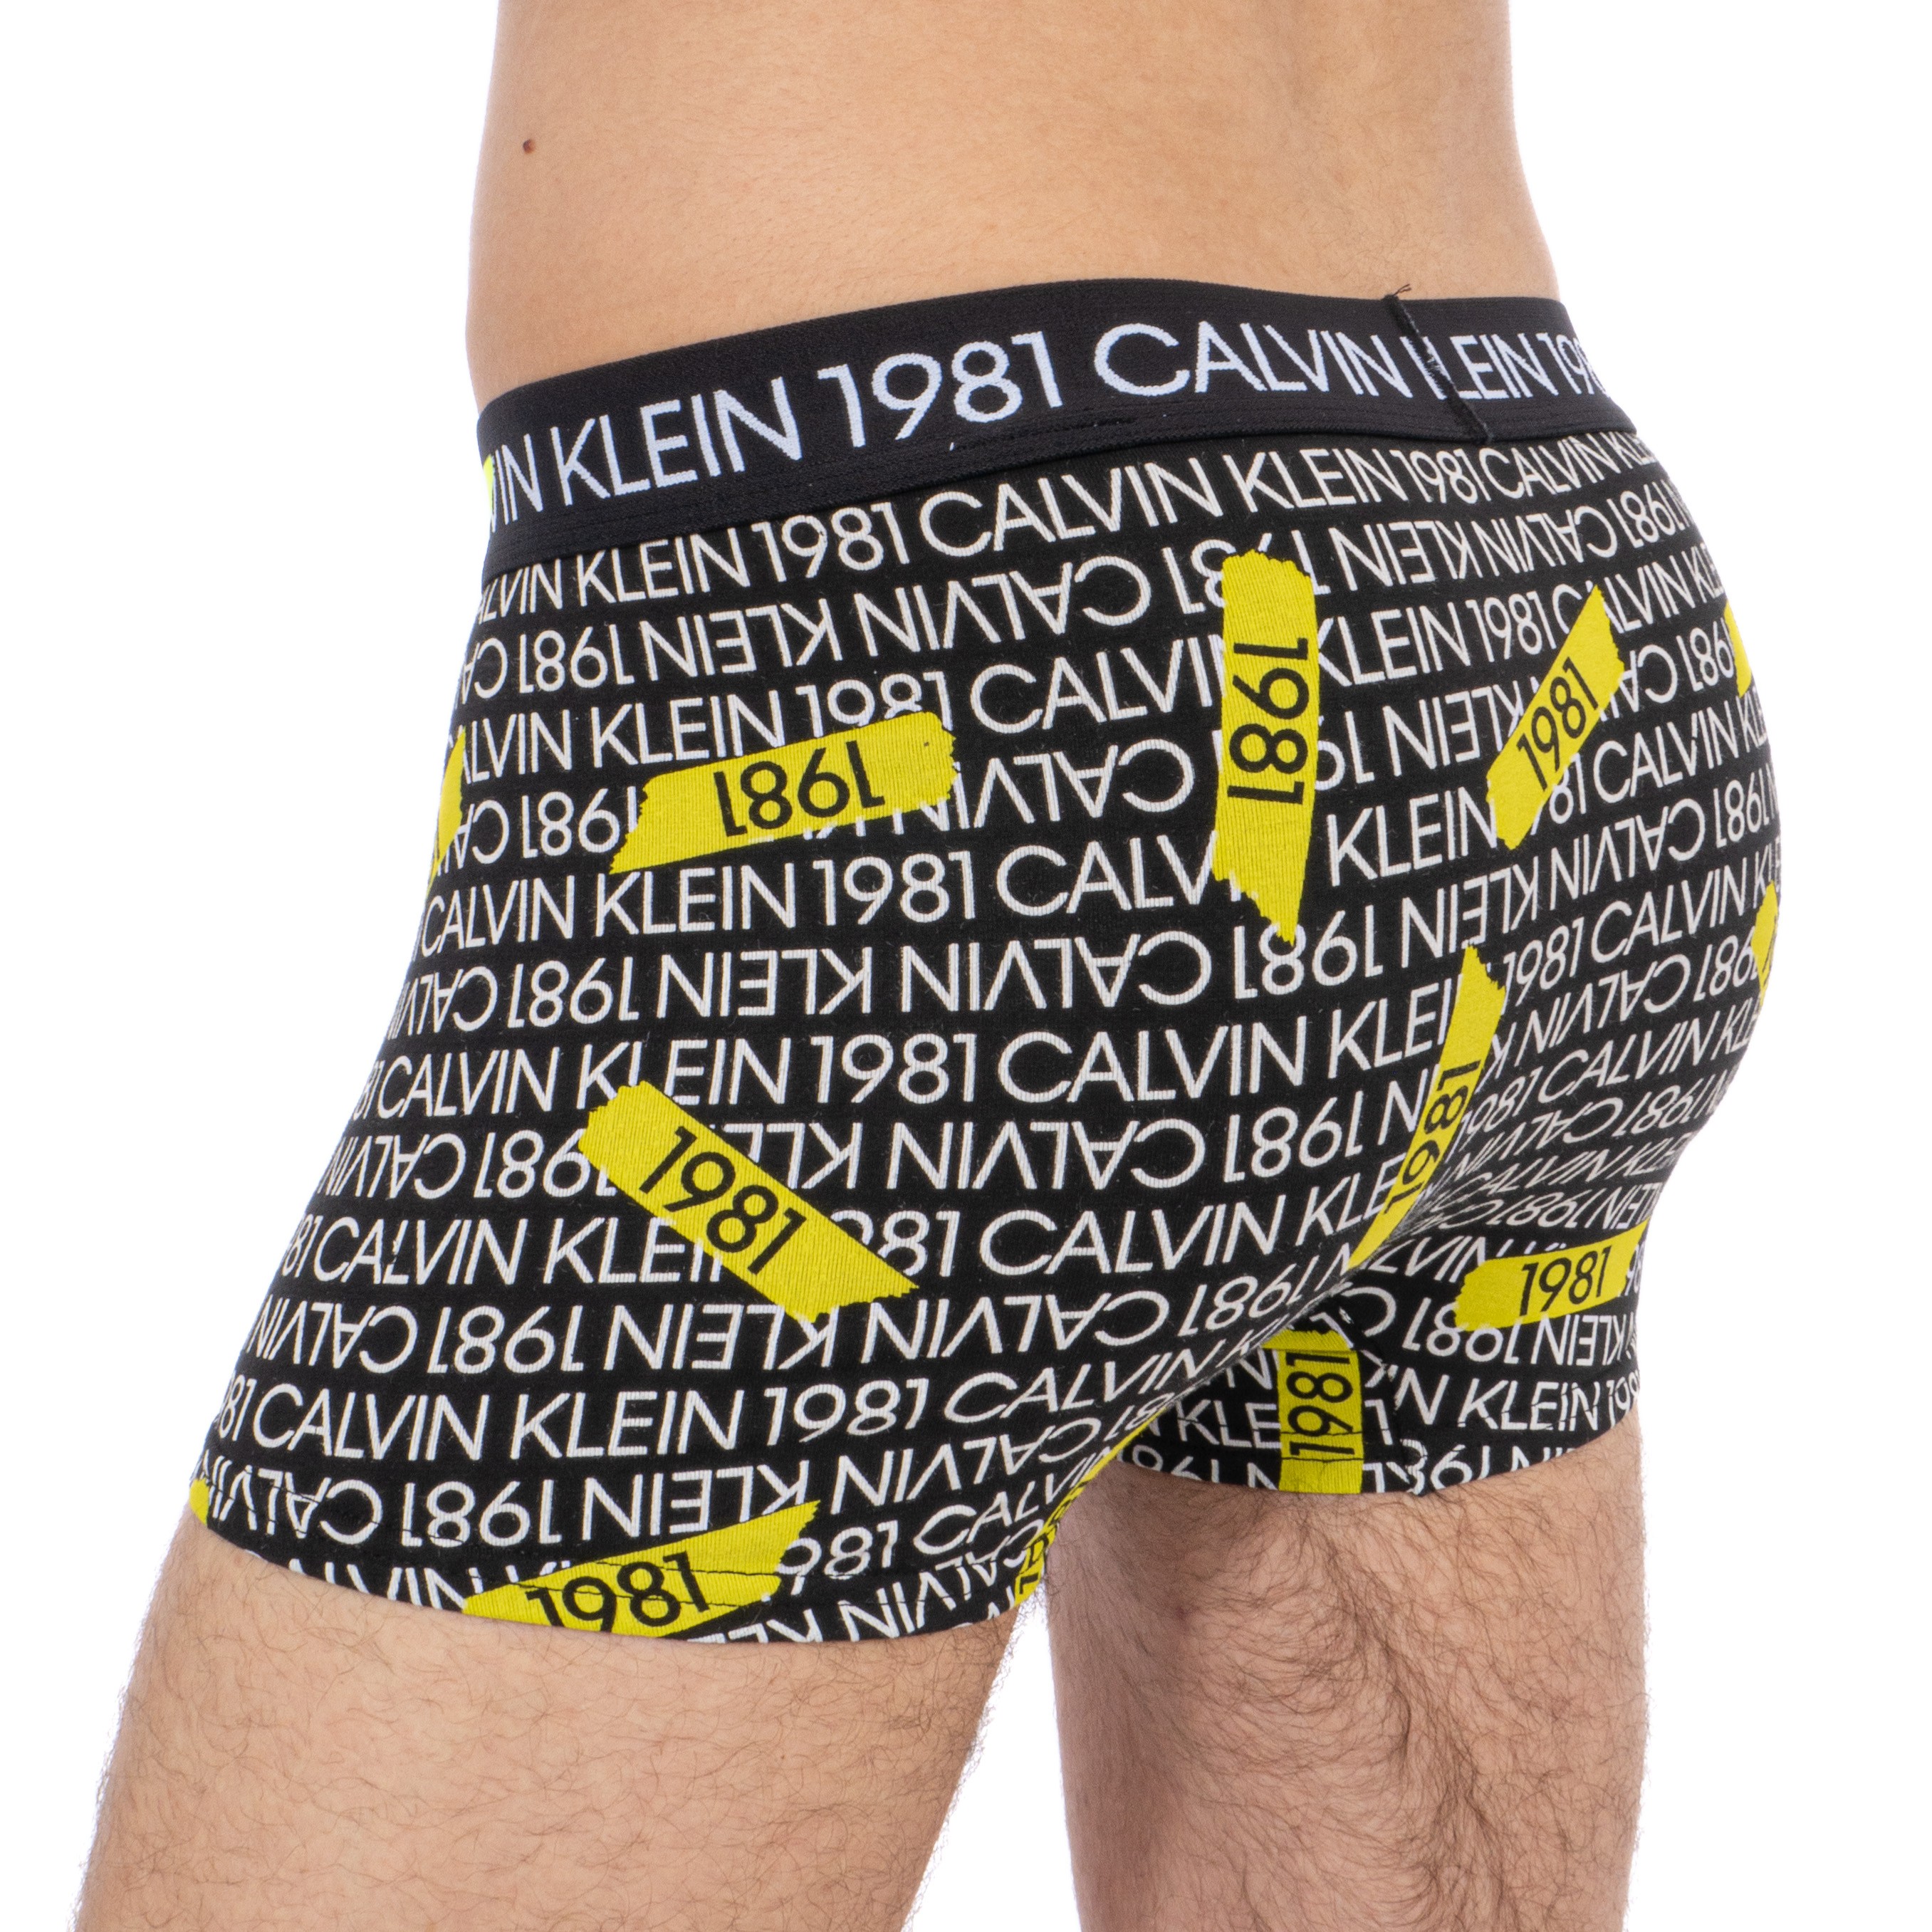 Boxer 1981 Bold Limited Edition: Boxers for man brand Calvin Klein ...